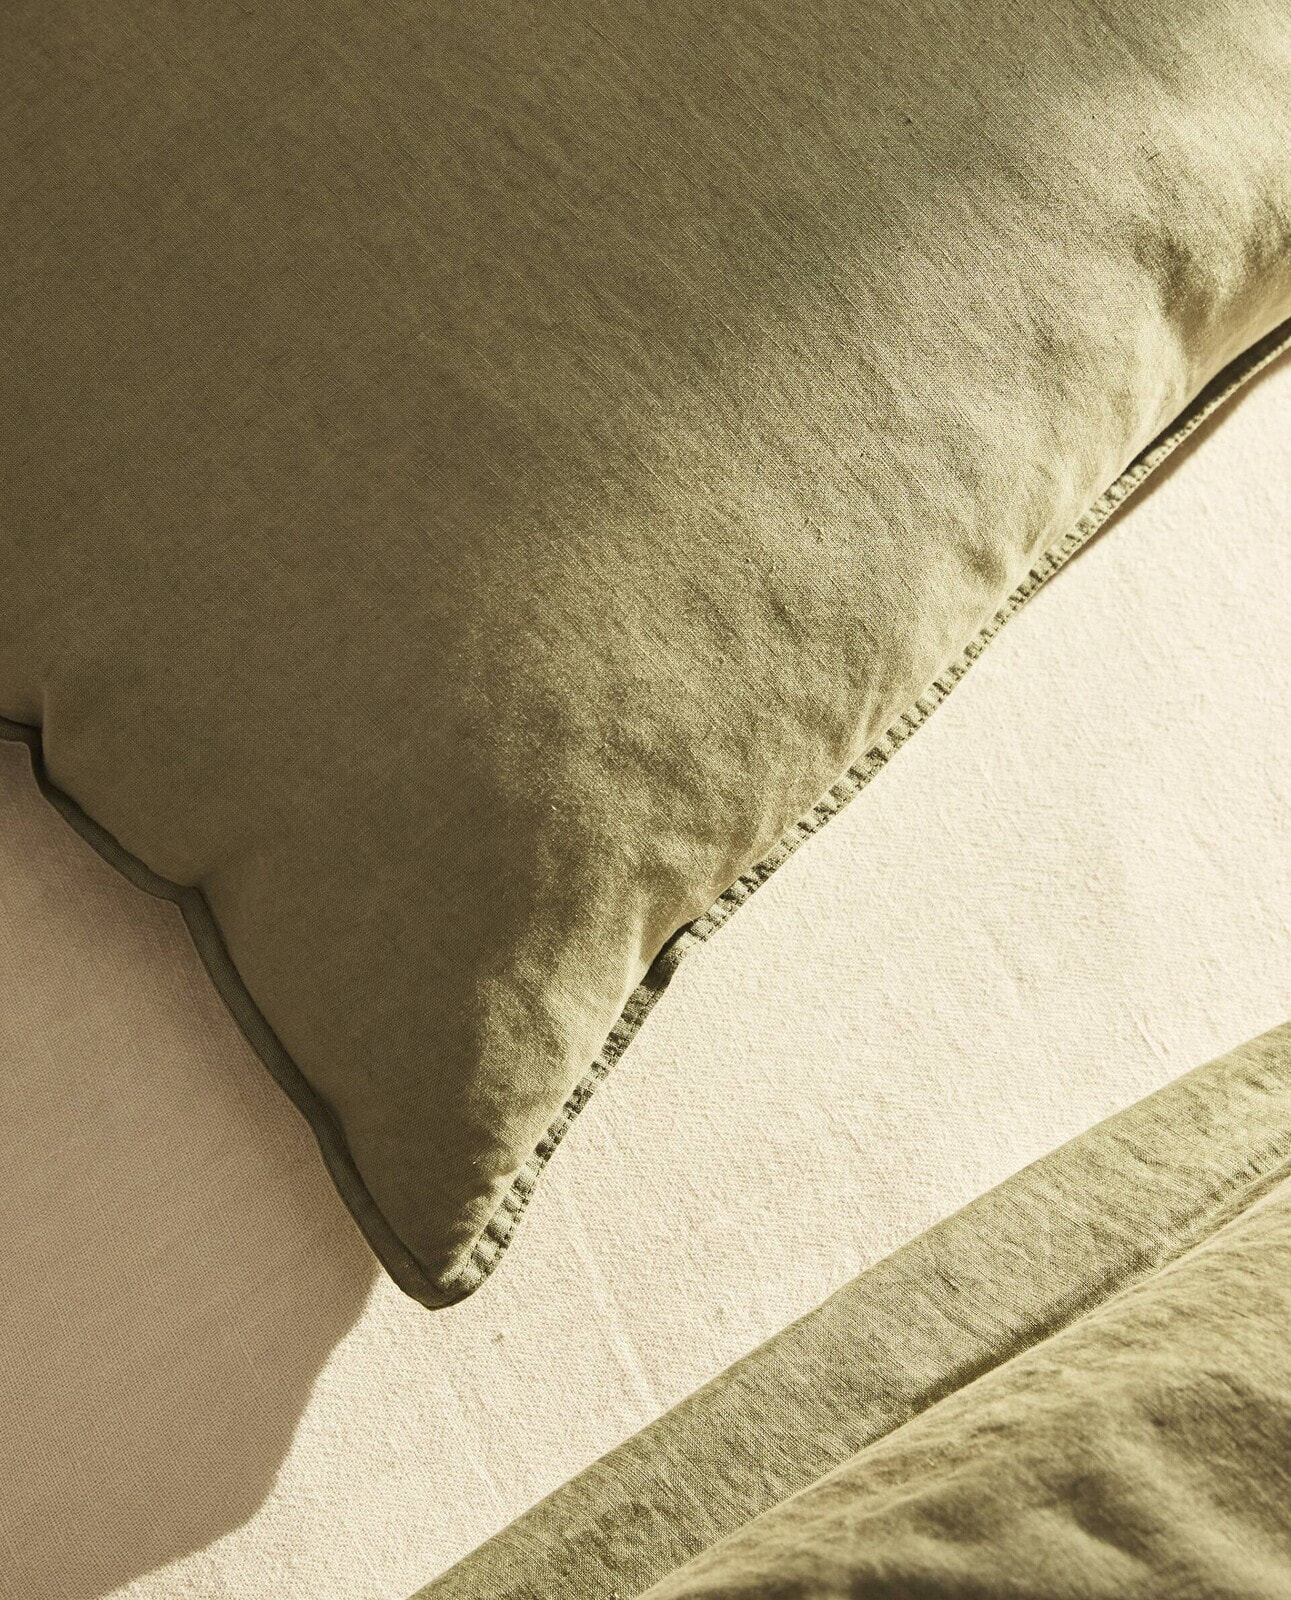 (140 gxm²) washed linen pillowcase